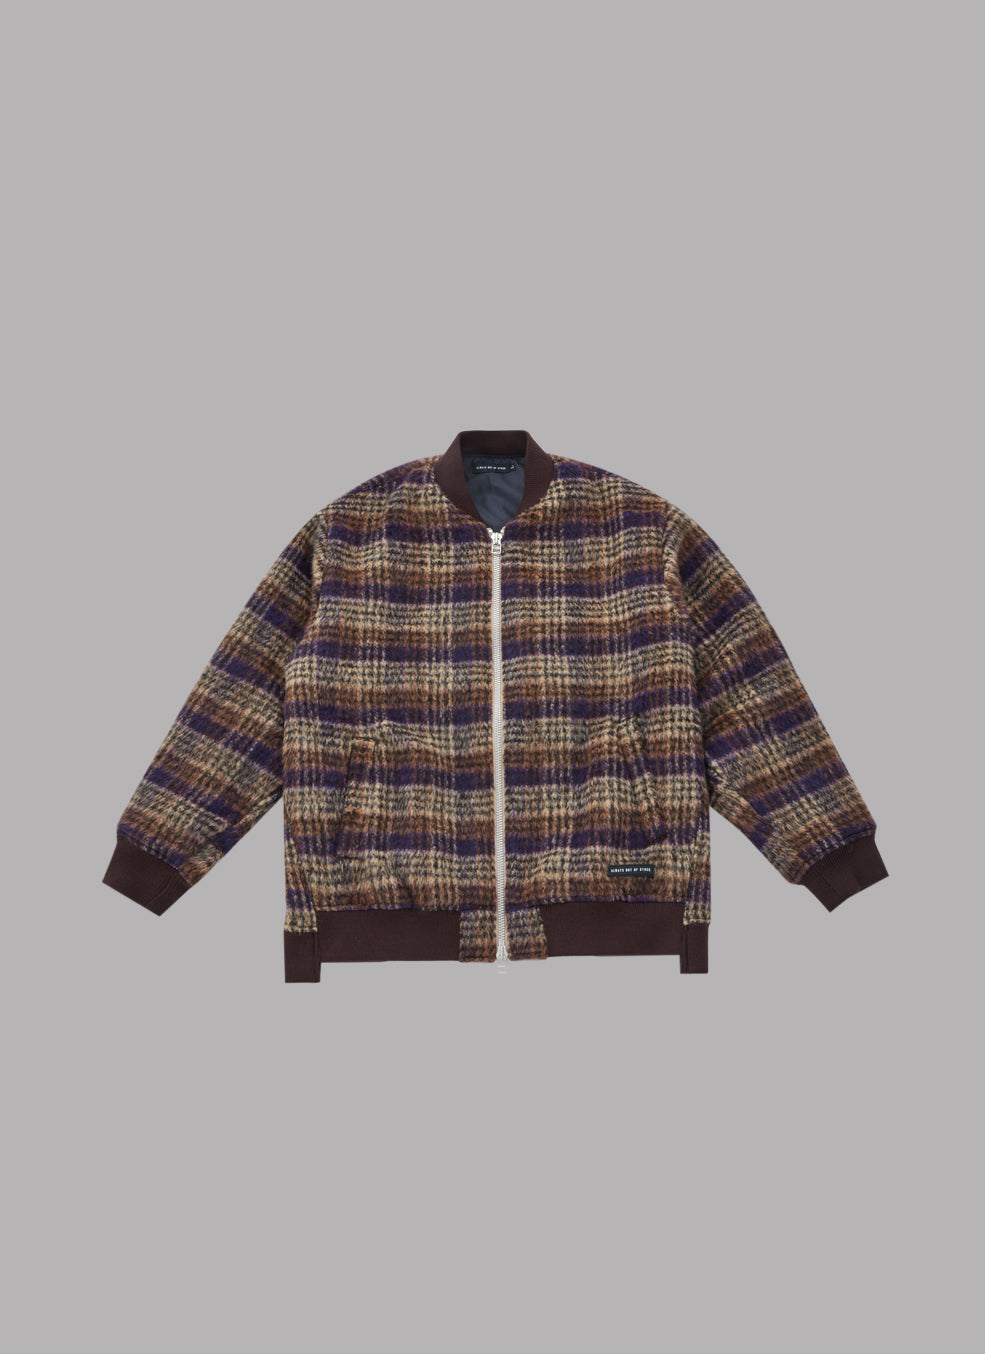 SHAGGY CHECK ZIP-UP BLOUSON-PURPLE x BROWN – ALWAYS OUT OF STOCK